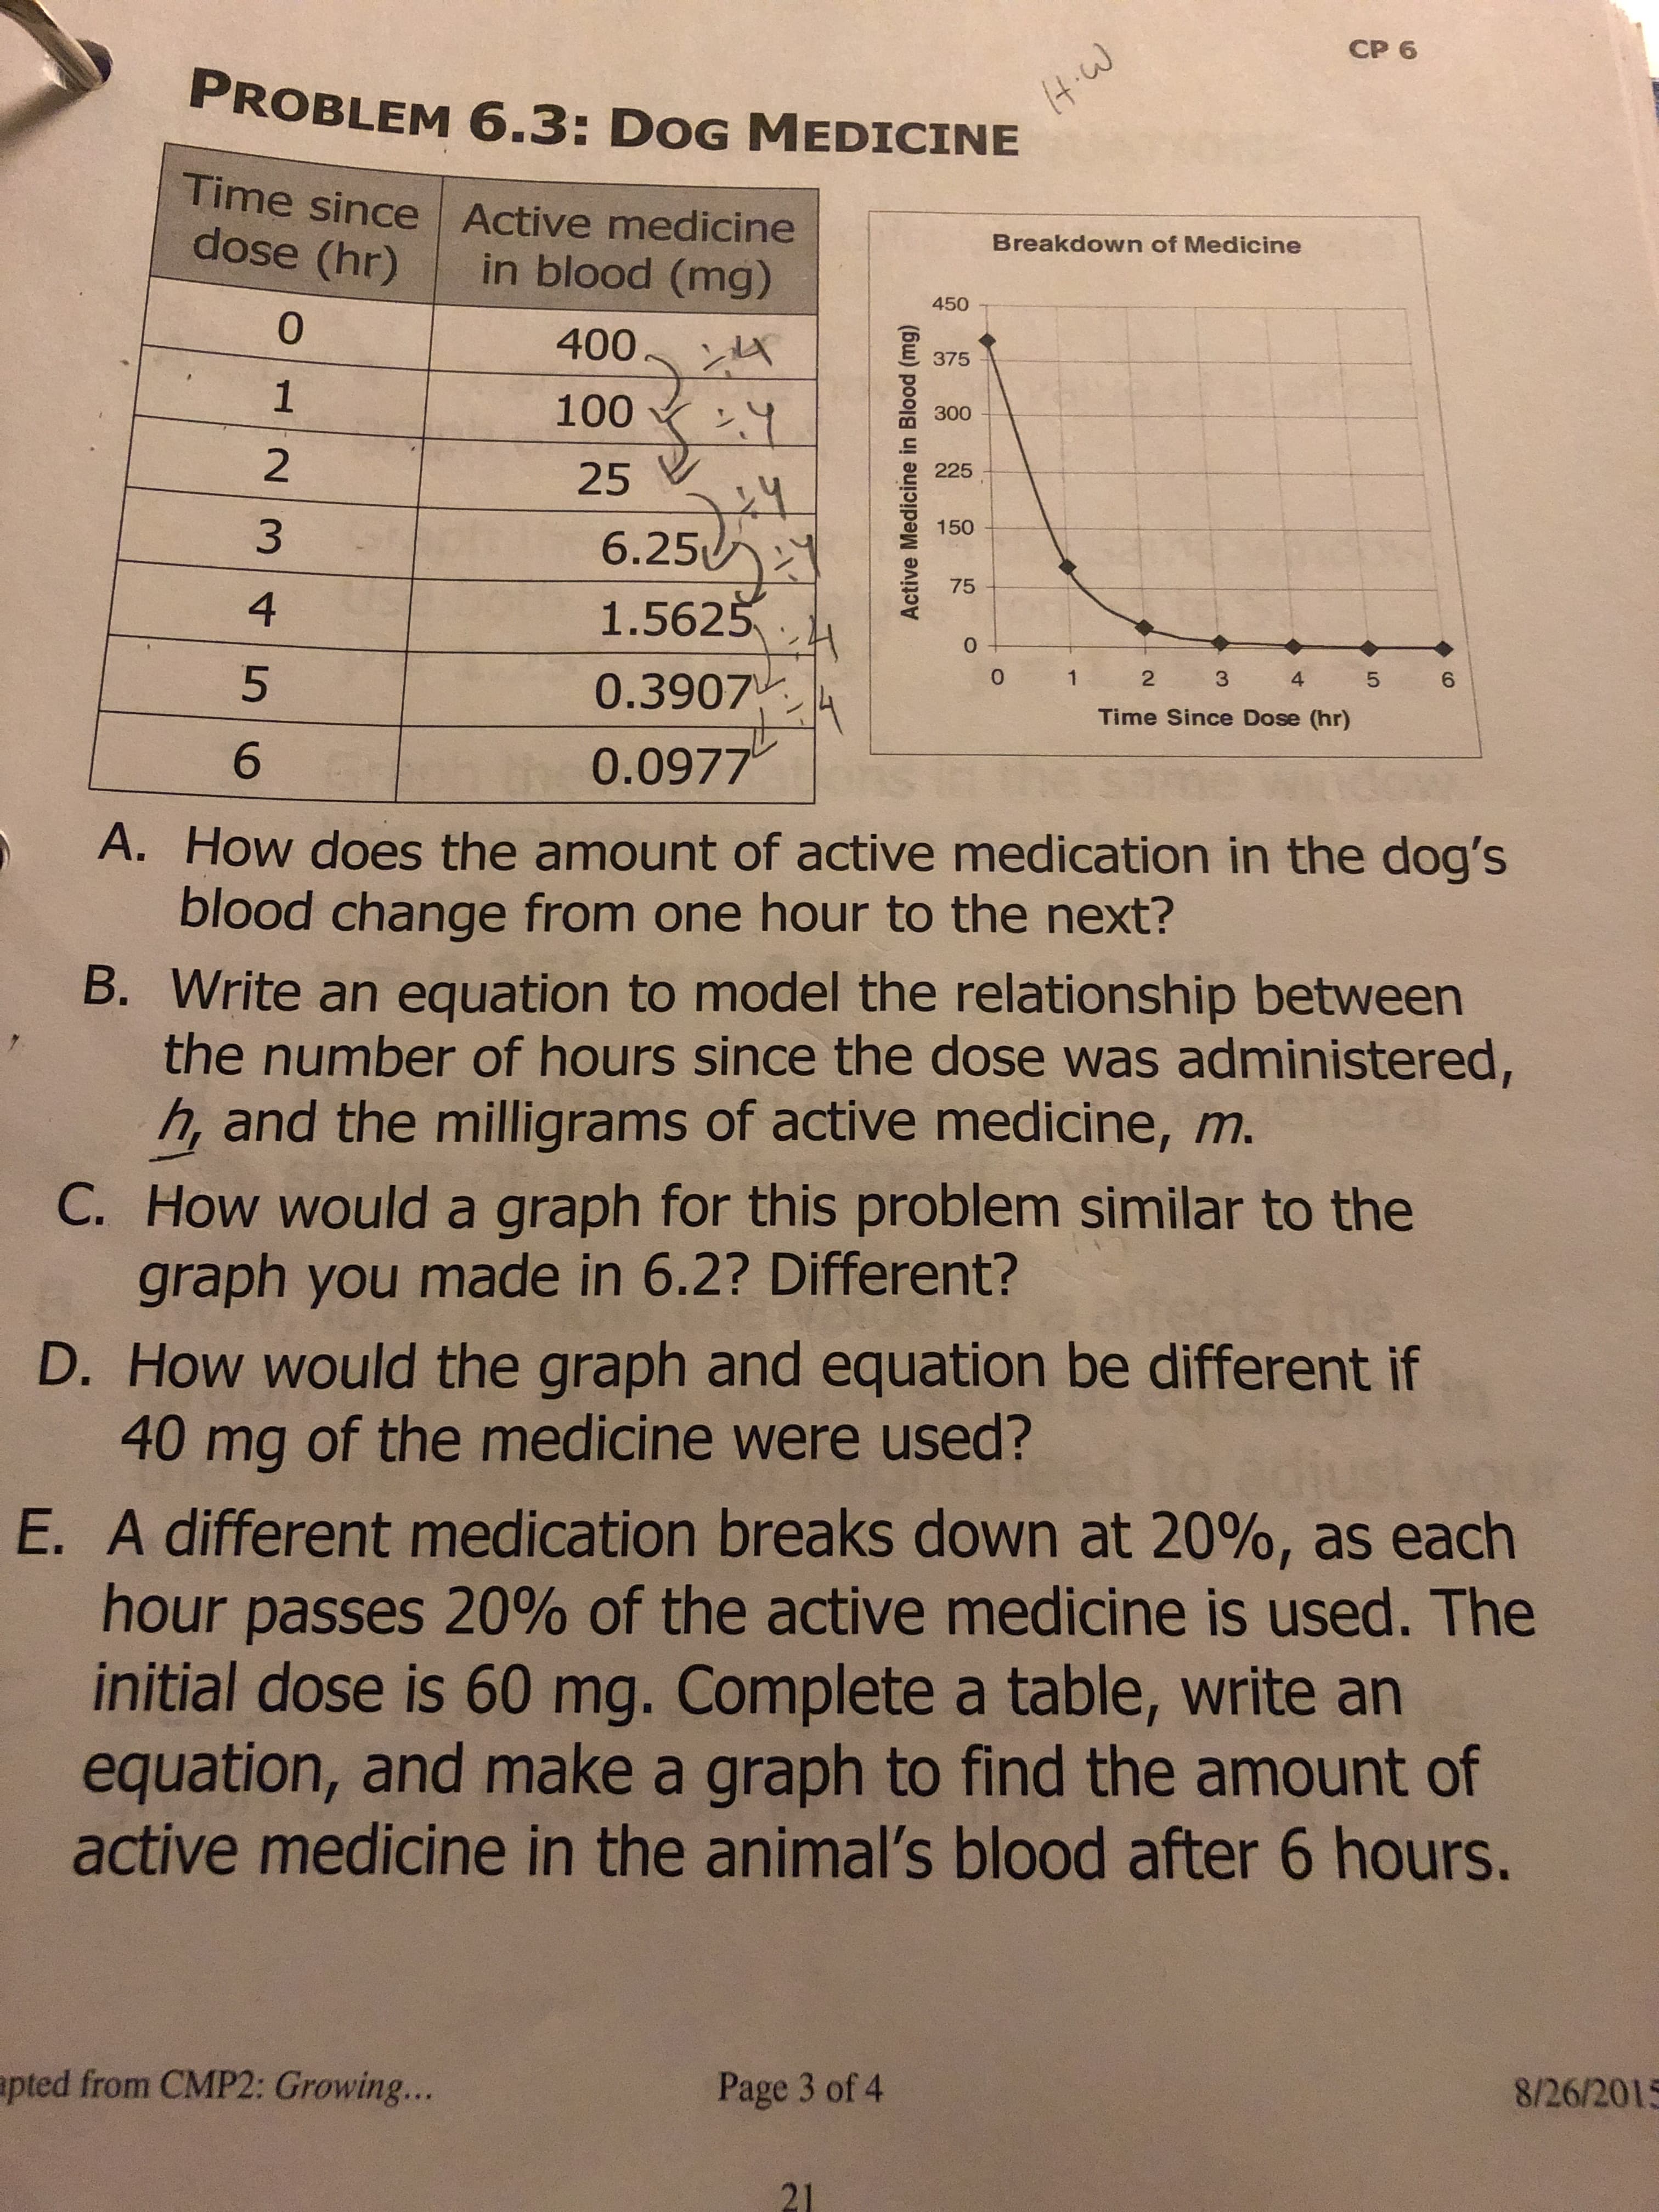 CP 6
PROBLEM 6.3: DoG MEDICINE
Time since Active medicine
dose (hr)
Breakdown of Medicine
in blood (mg)
450
0
400
375
1
100
300
2
25
225
3
150
6.25
75
4
1.5625
24
0
5
0.3907
0
1
2
3
4
6
Time Since Dose (hr)
th0.0977
A. How does the amount of active medication in the dog's
blood change from one hour to the next?
B. Write an equation to model the relationship between
the number of hours since the dose was administered,
h, and the milligrams of active medicine, m.
C. How would a graph for this problem similar to the
graph you made in 6.2? Different?
D. How would the graph and equation be different if
40 mg of the medicine were used?
E. A different medication breaks down at 20%, as each
hour passes 20% of the active medicine is used. The
initial dose is 60 mg. Complete a table, write an
equation, and make a graph to find the amount of
active medicine in the animal's blood after 6 hours.
apted from CMP2: Growing...
Page 3 of 4
8/26/2015
21
Active Medicine in Blood (mg)
LO
